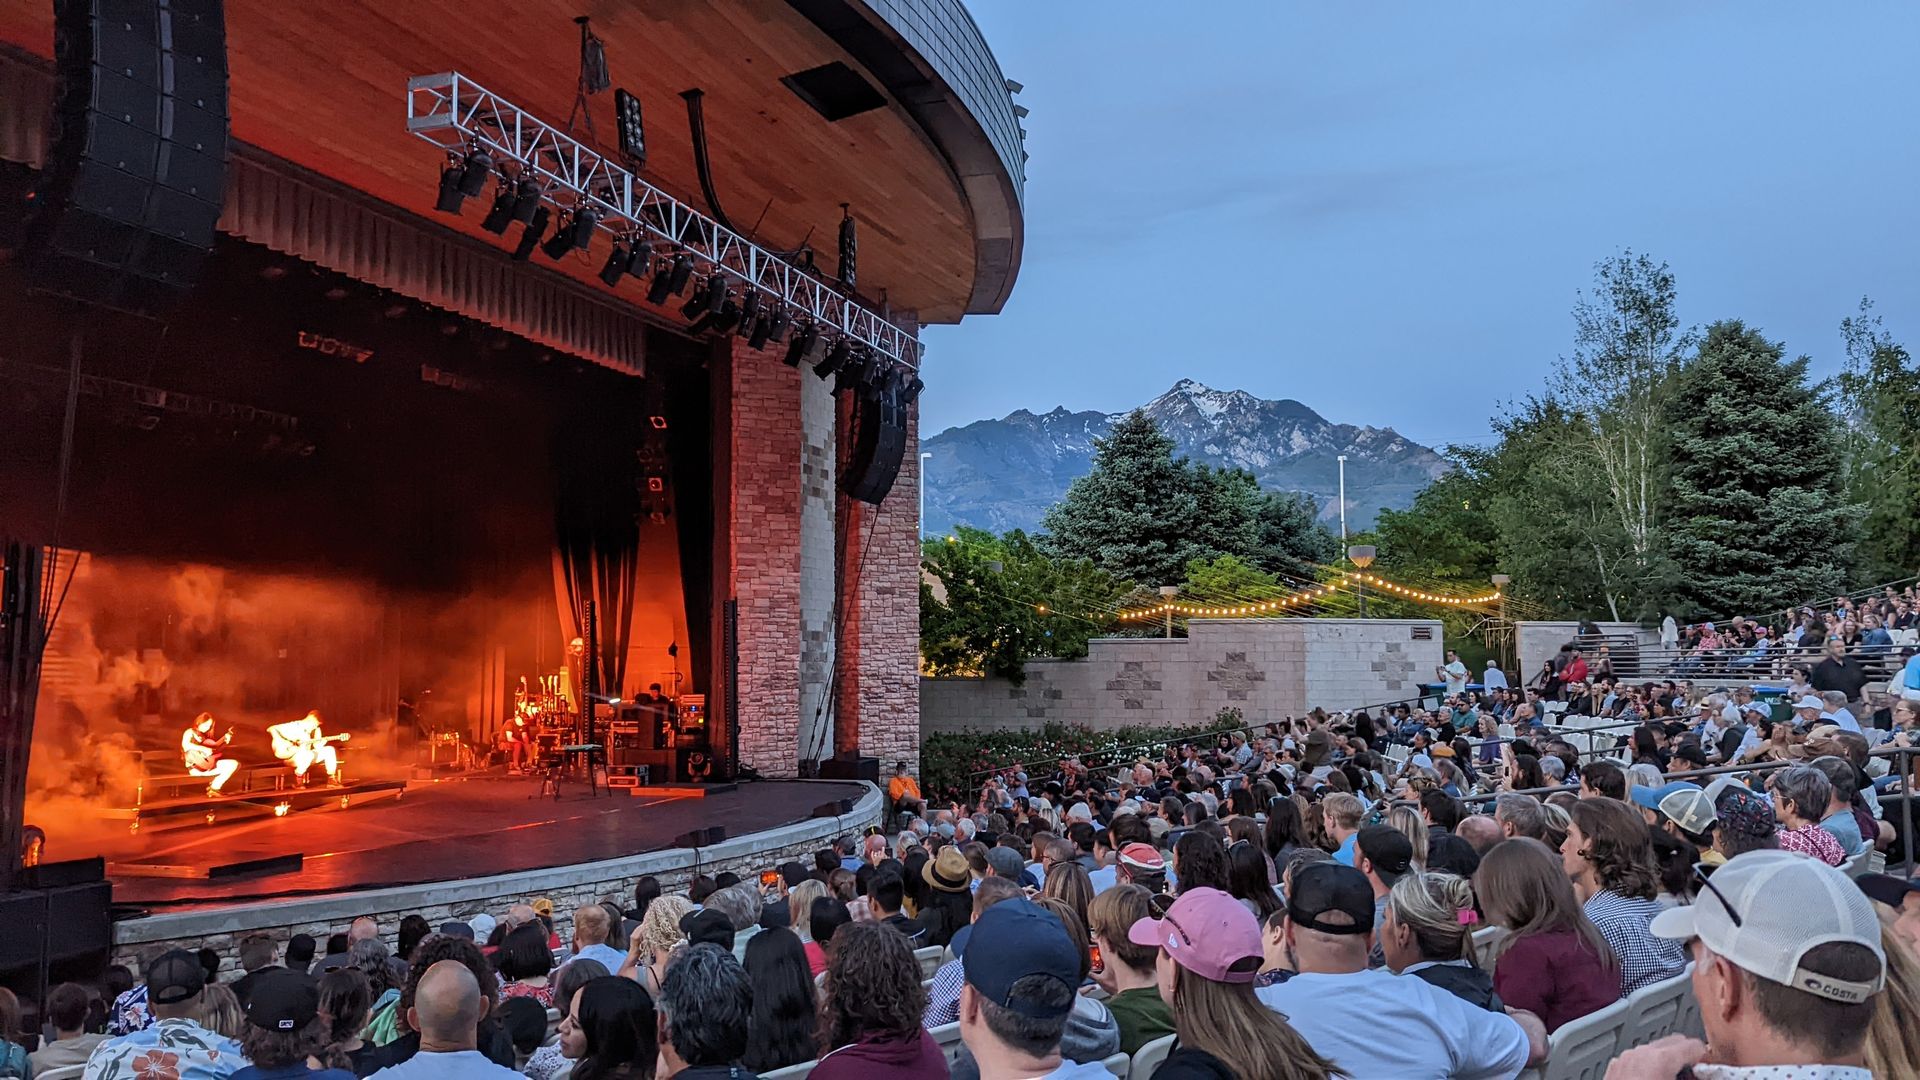 Why the Sandy Amphitheater is Utah's most underrated concert venue